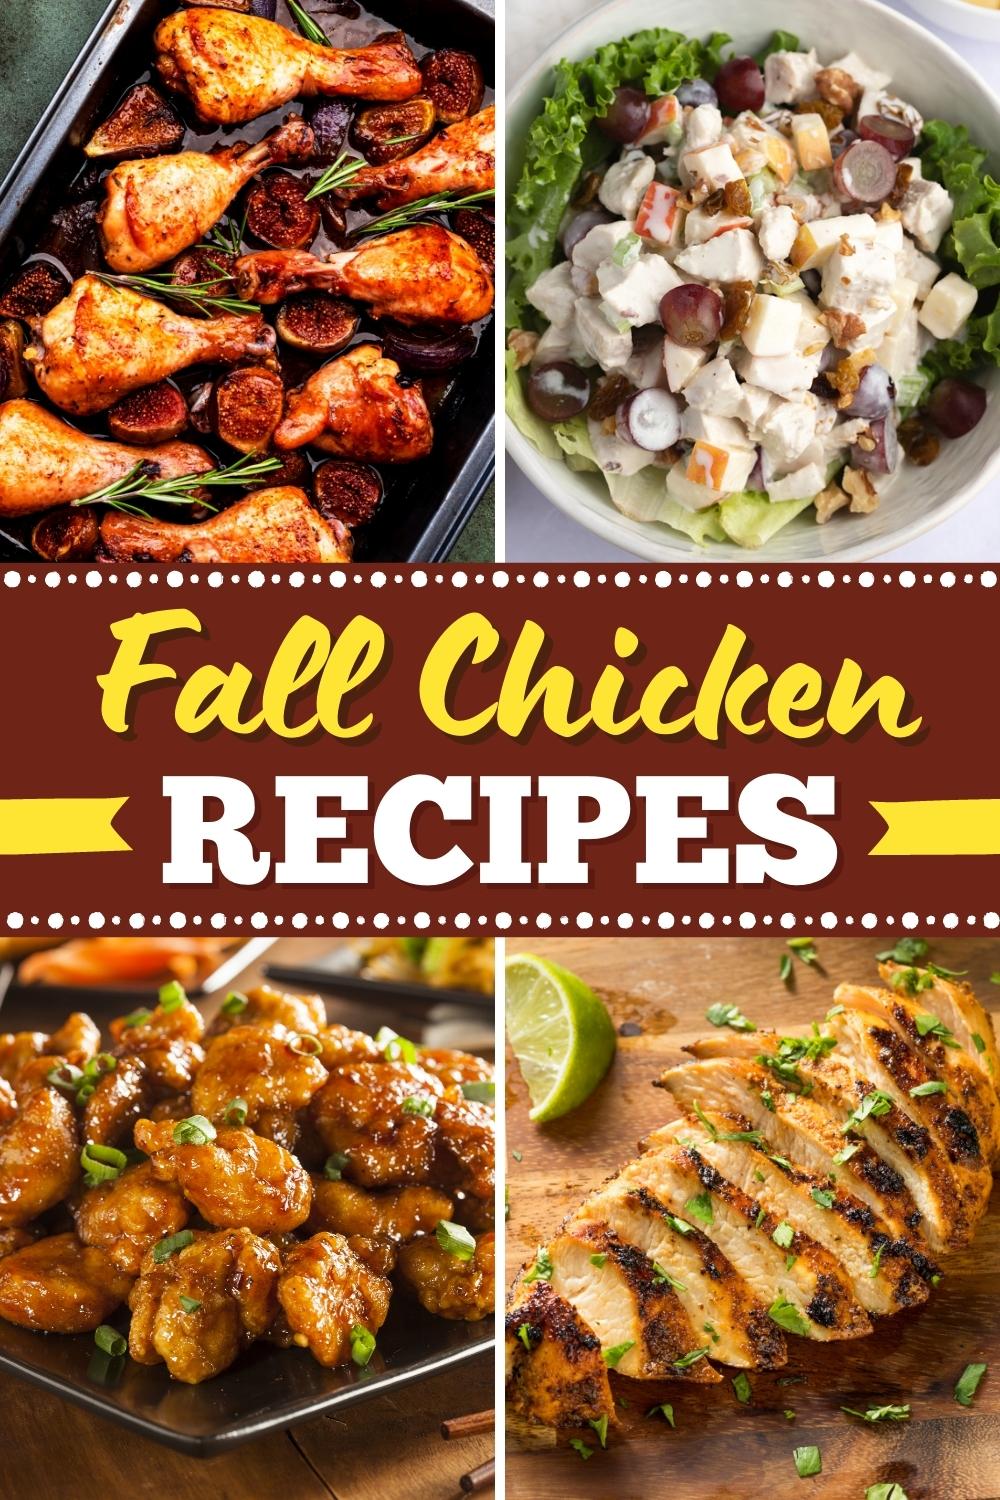 35 Best Fall Chicken Recipes for the Family - Insanely Good